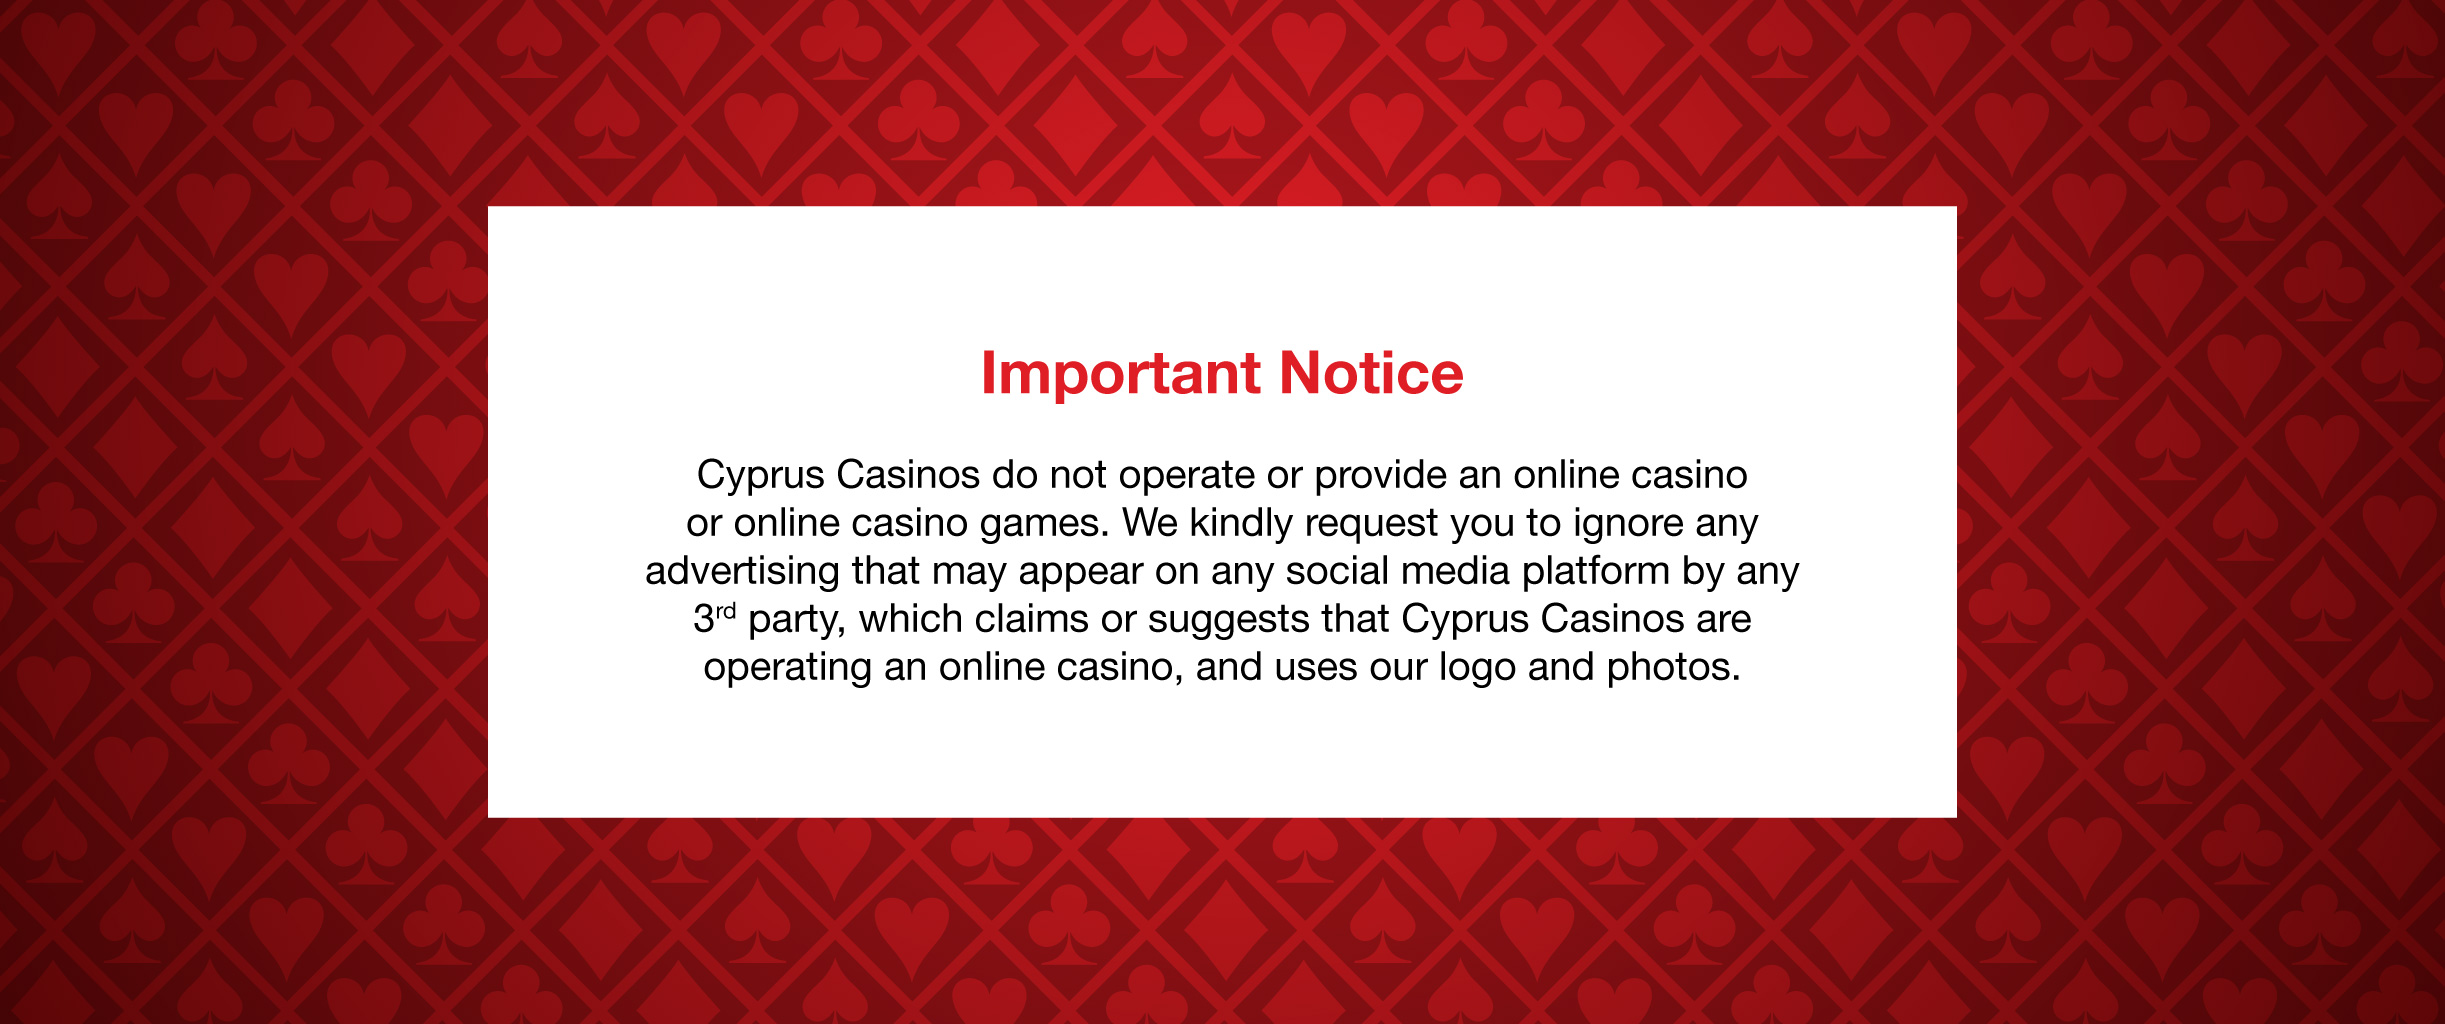 How To Save Money with casinos in Cyprus?